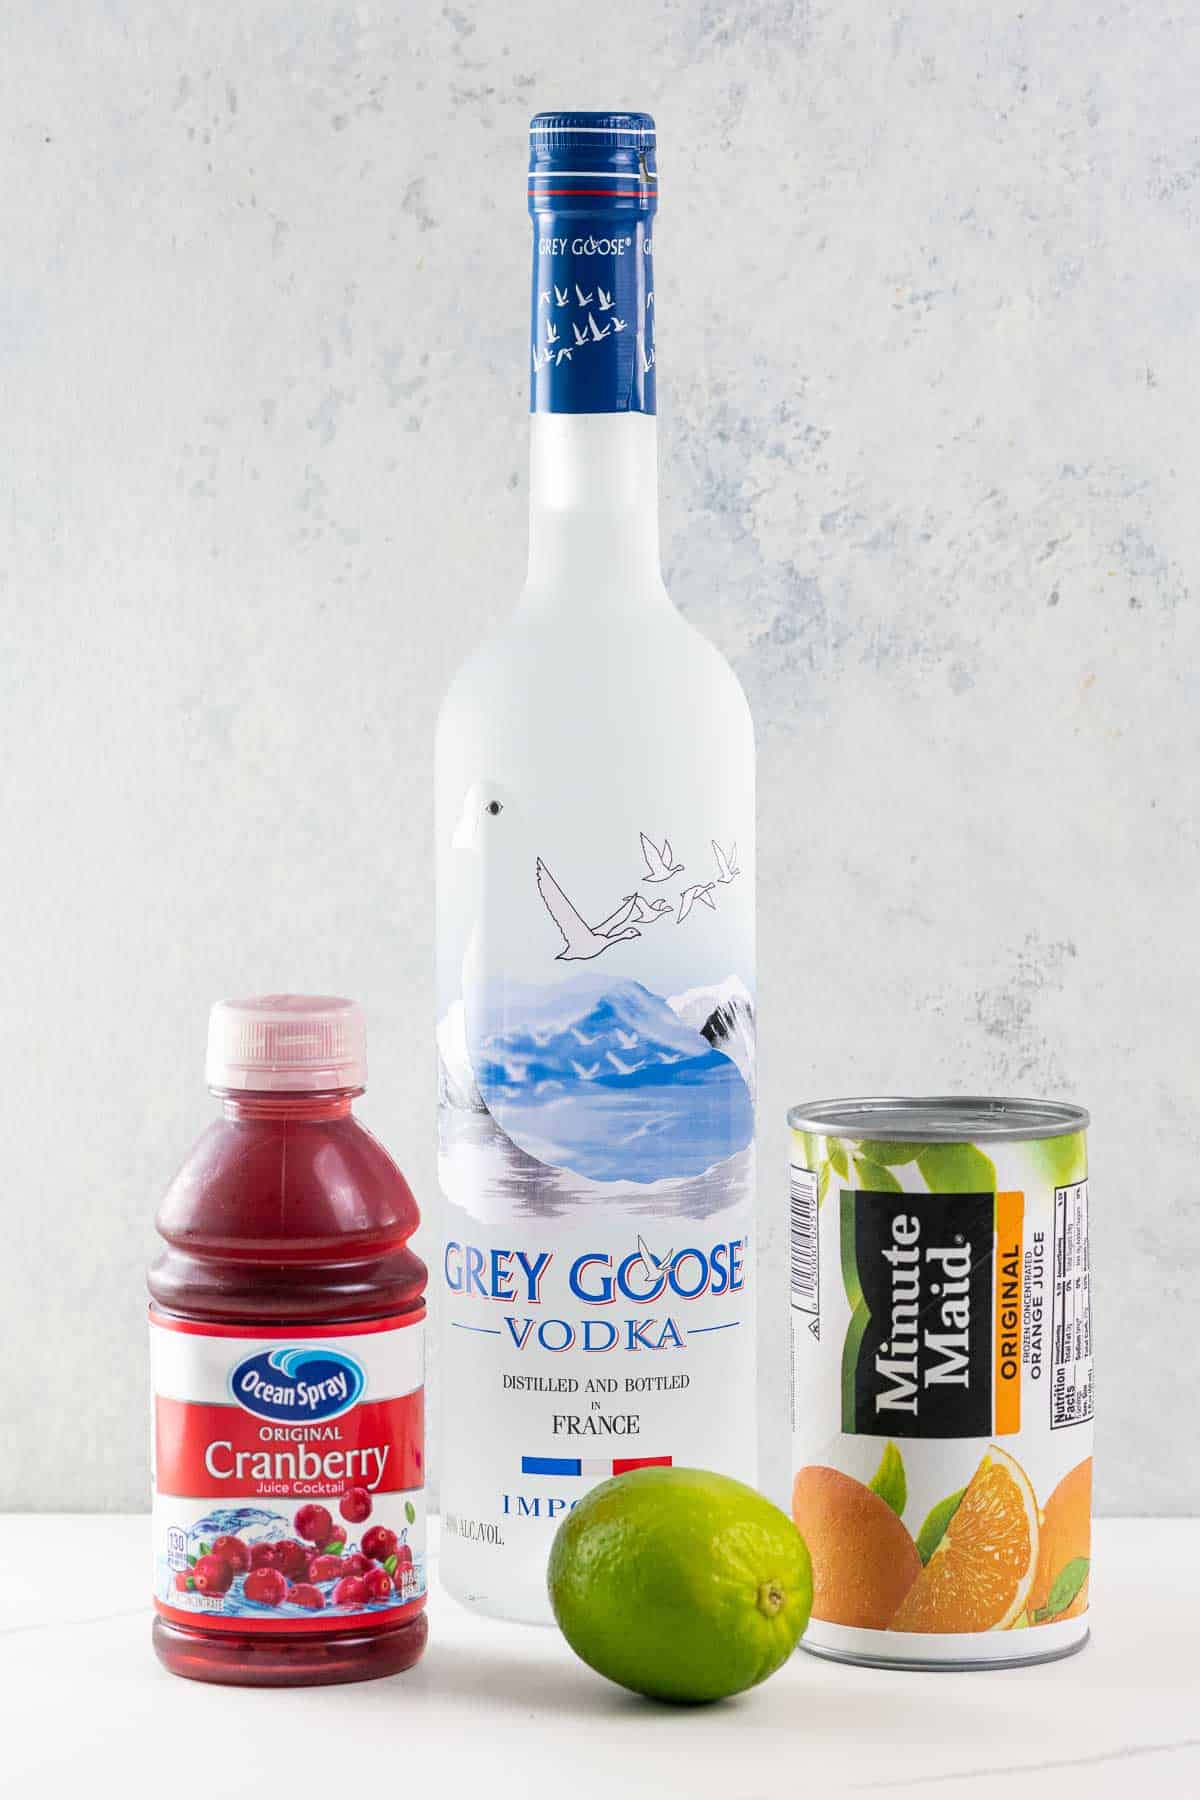 a bottle of grey goose vodka, a small bottle of ocean spray cranberry juice cocktail, a lime, and a can of minute maid orange juice concentrate